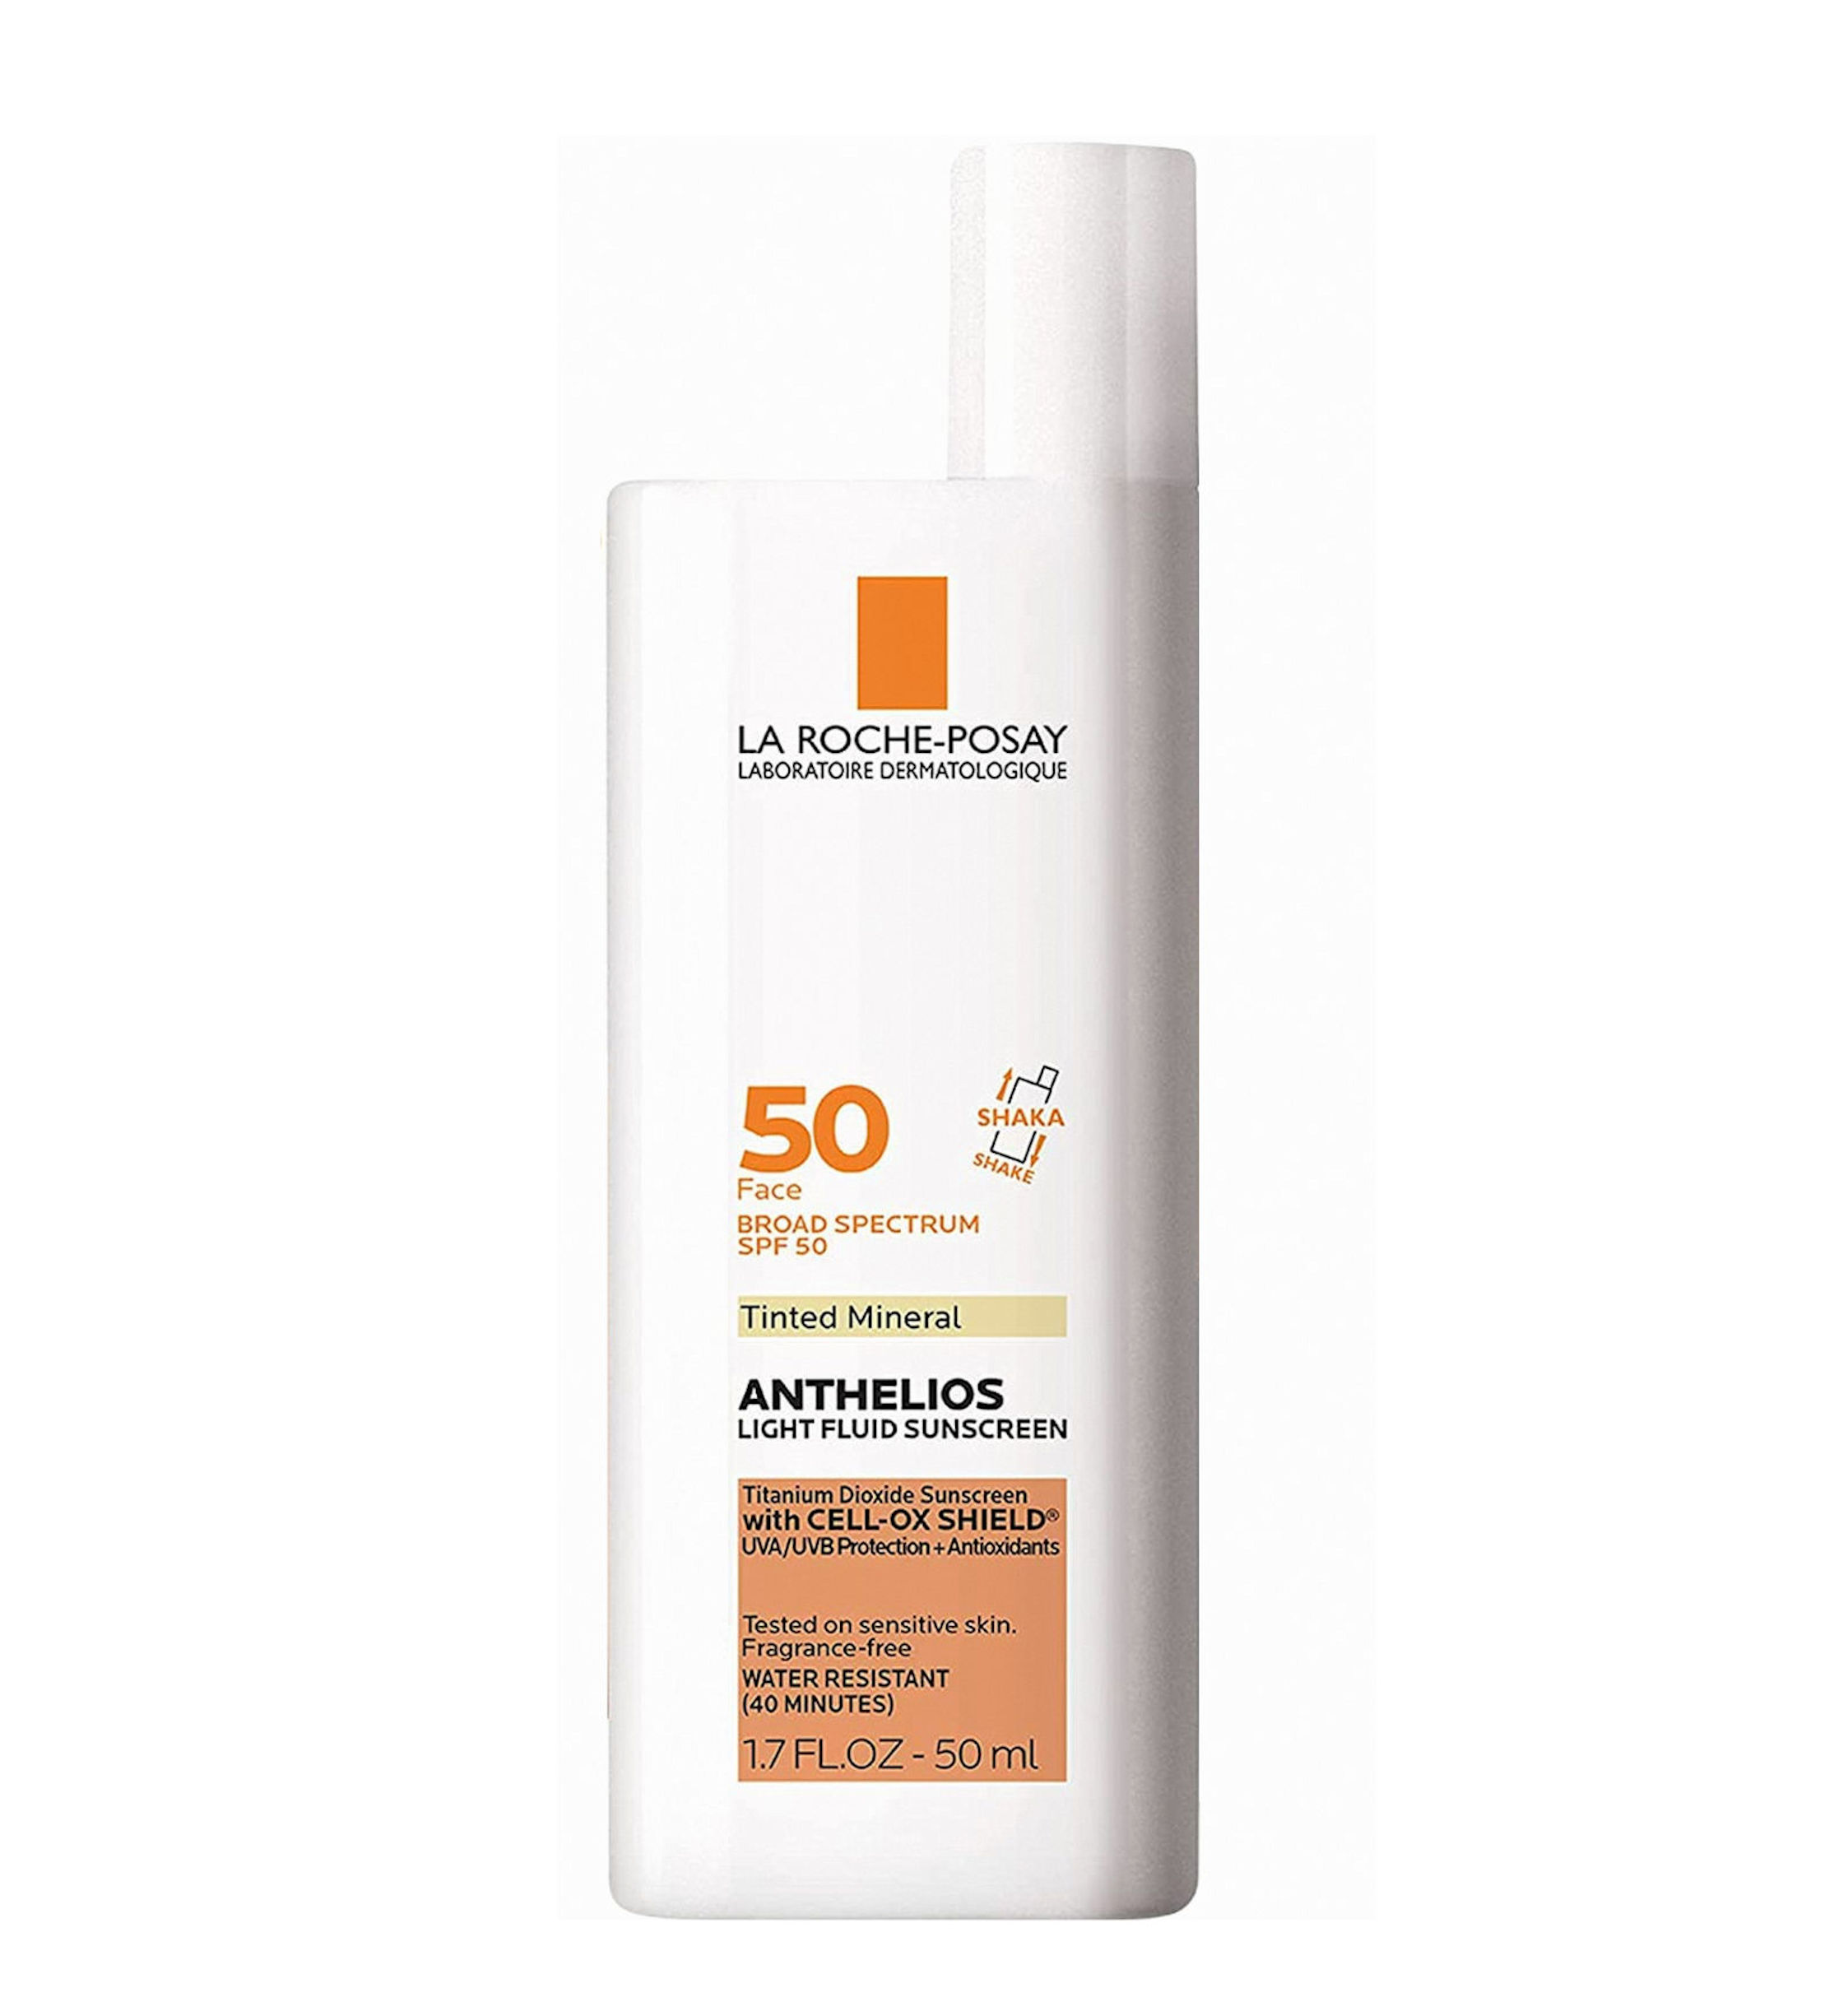 La Roche-Posay Anthelios Mineral Tinted Sunscreen SPF50 for Face 1.7 fl. oz. (50ml) - image 1 of 4